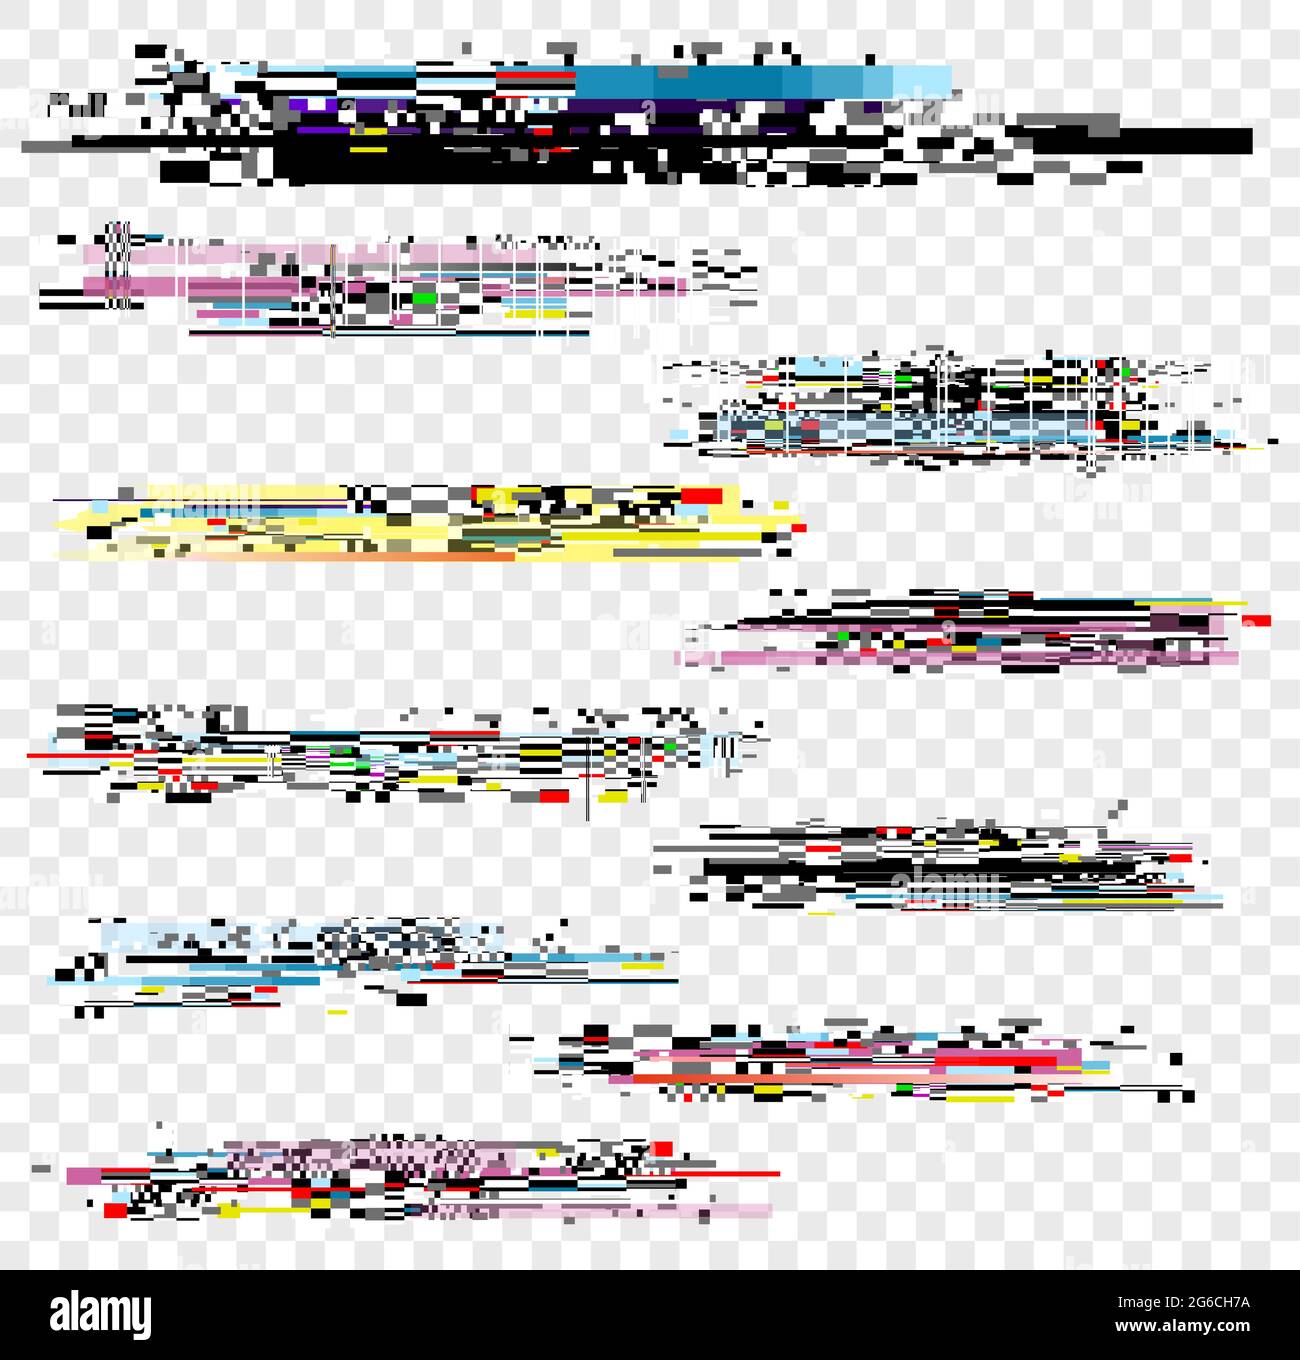 Vector illustration set of noise effect, decay signal glitch elements isolated on white background. Grunge monitor and Tv screen problems set. Stock Vector